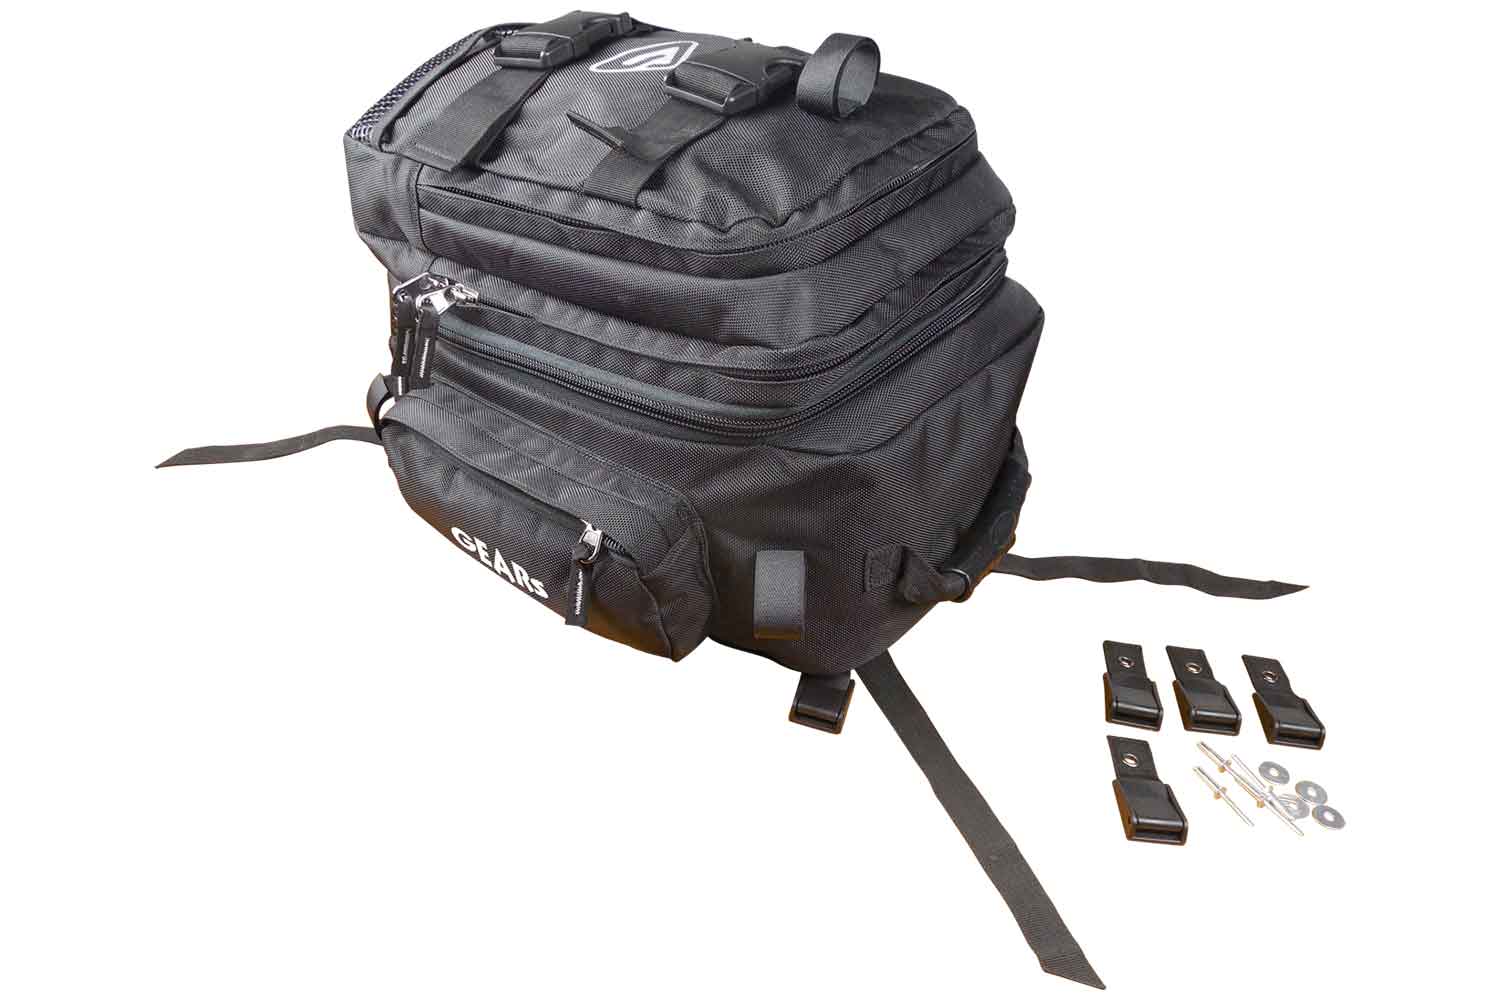 Black snowmobile tunnel bag with fixtures